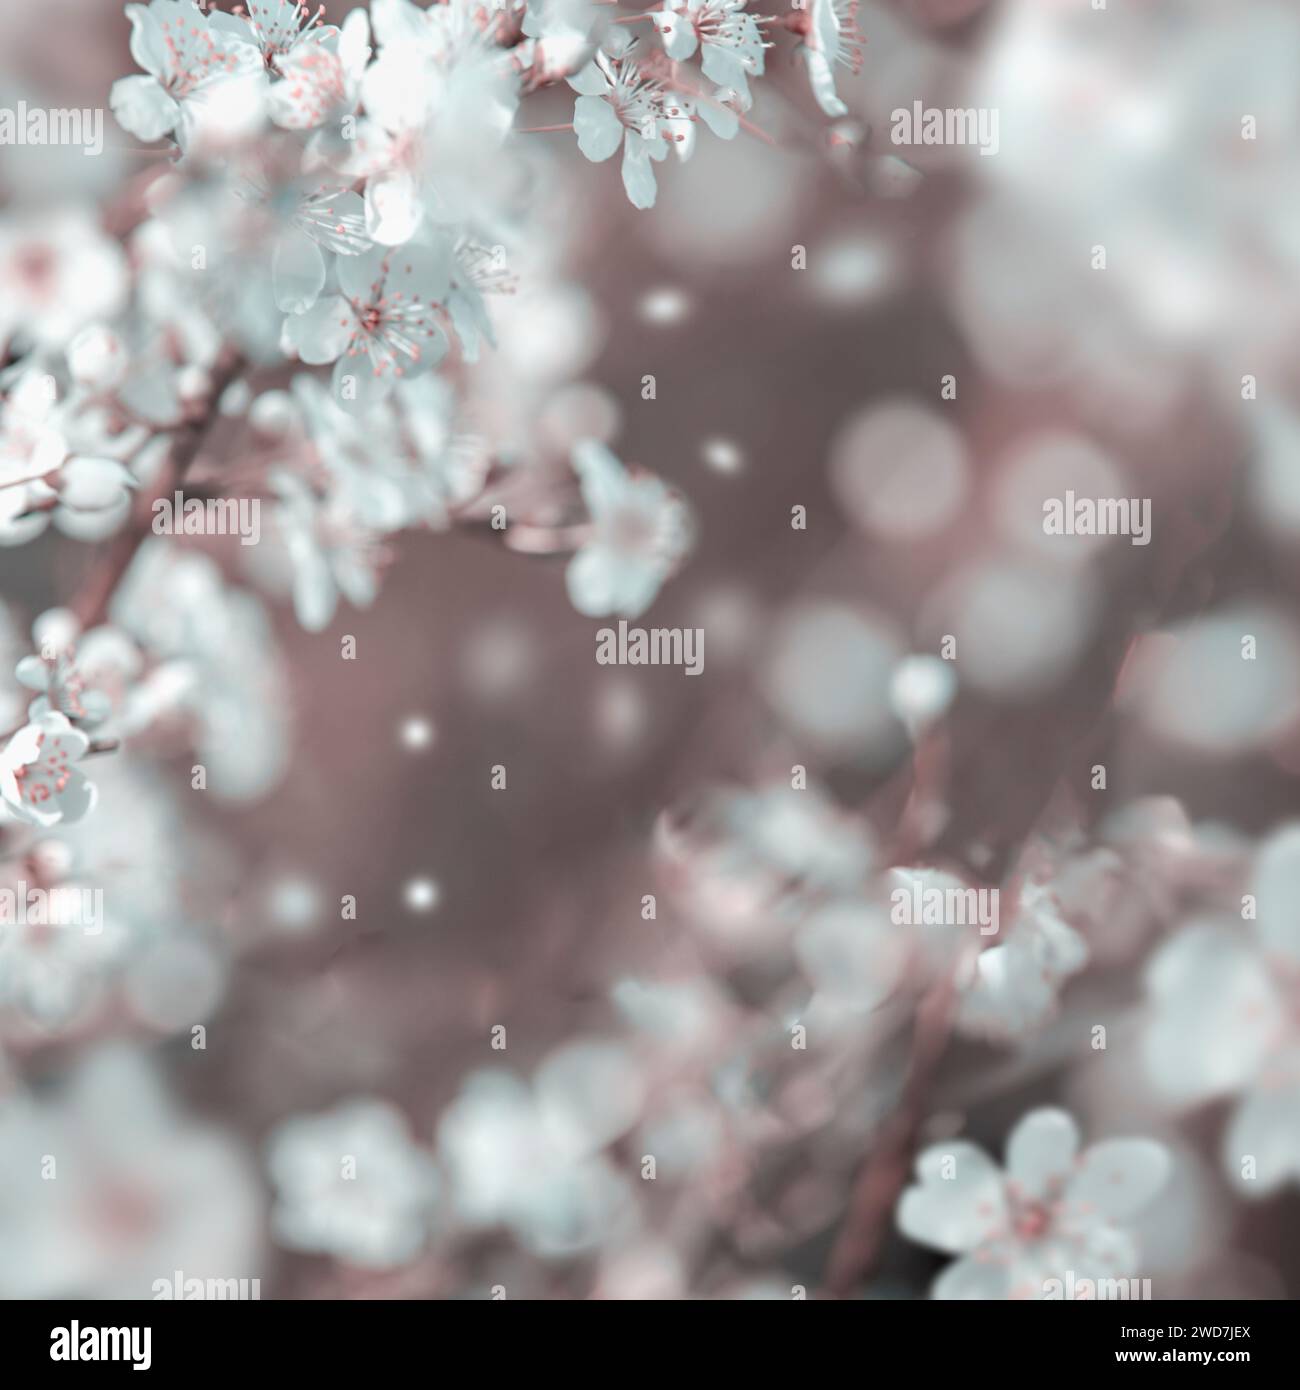 Cherry blossom at bokeh background, outdoor springtime nature Stock Photo